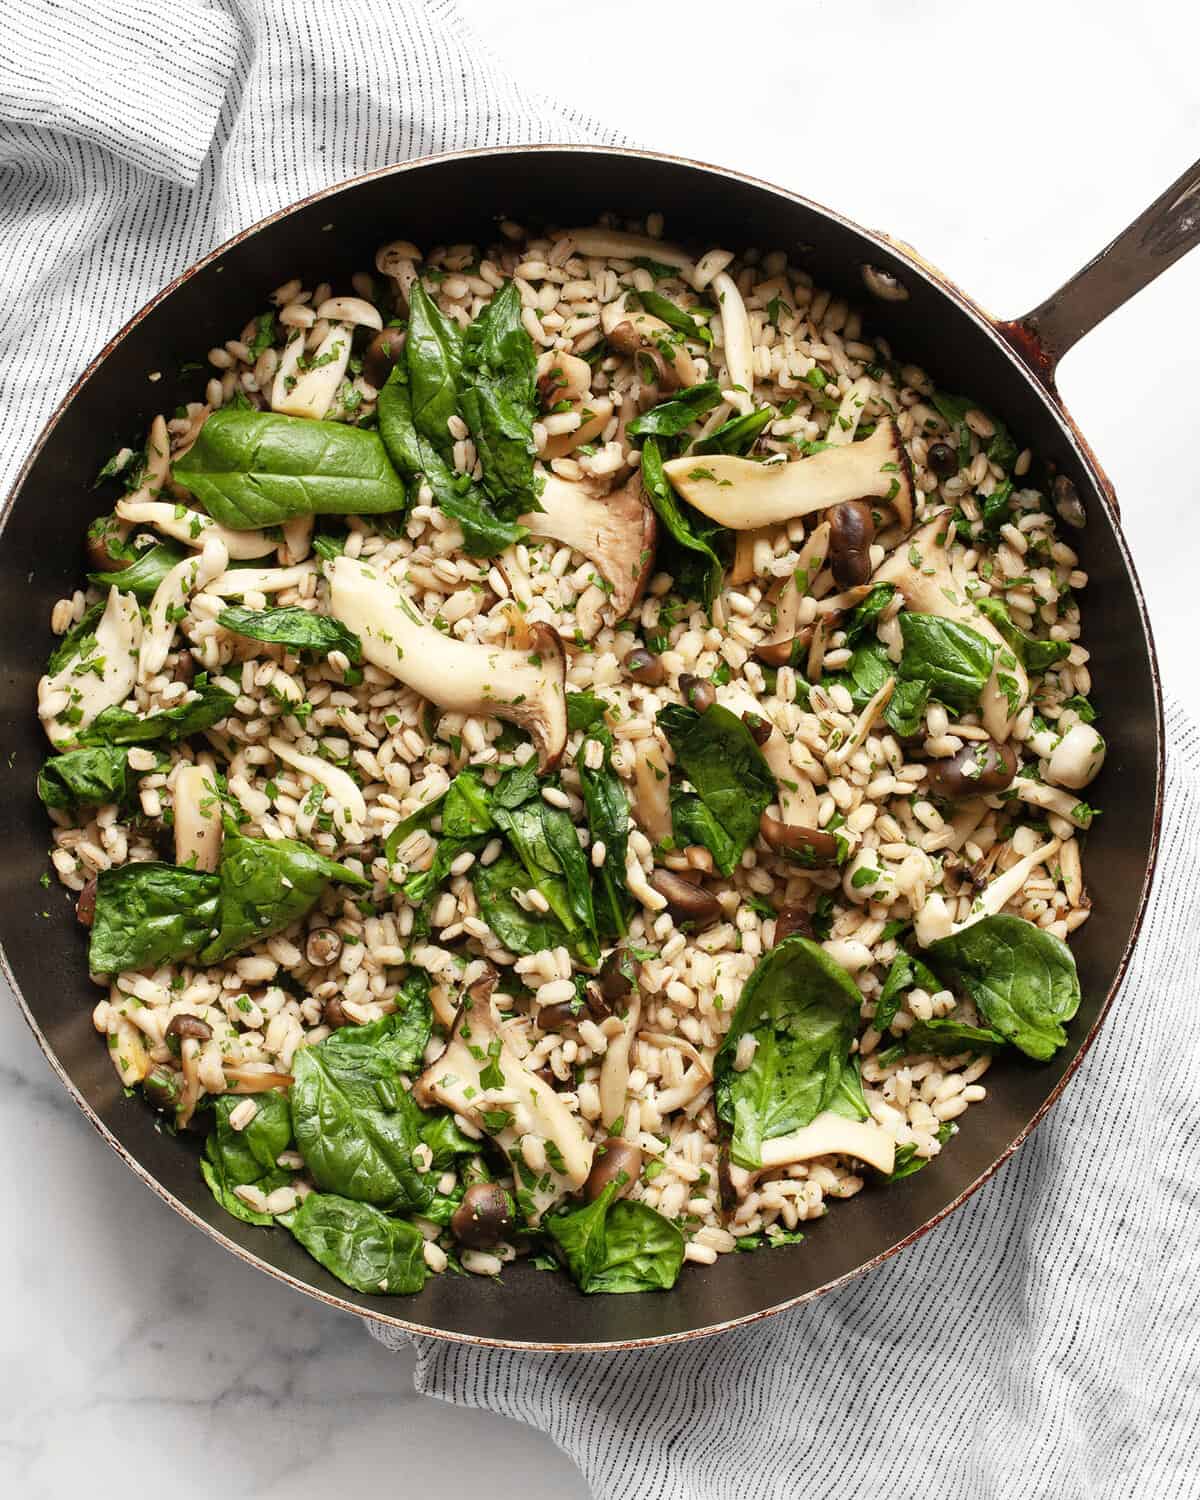 A skillet with barley, sautéed mushrooms and spinach.